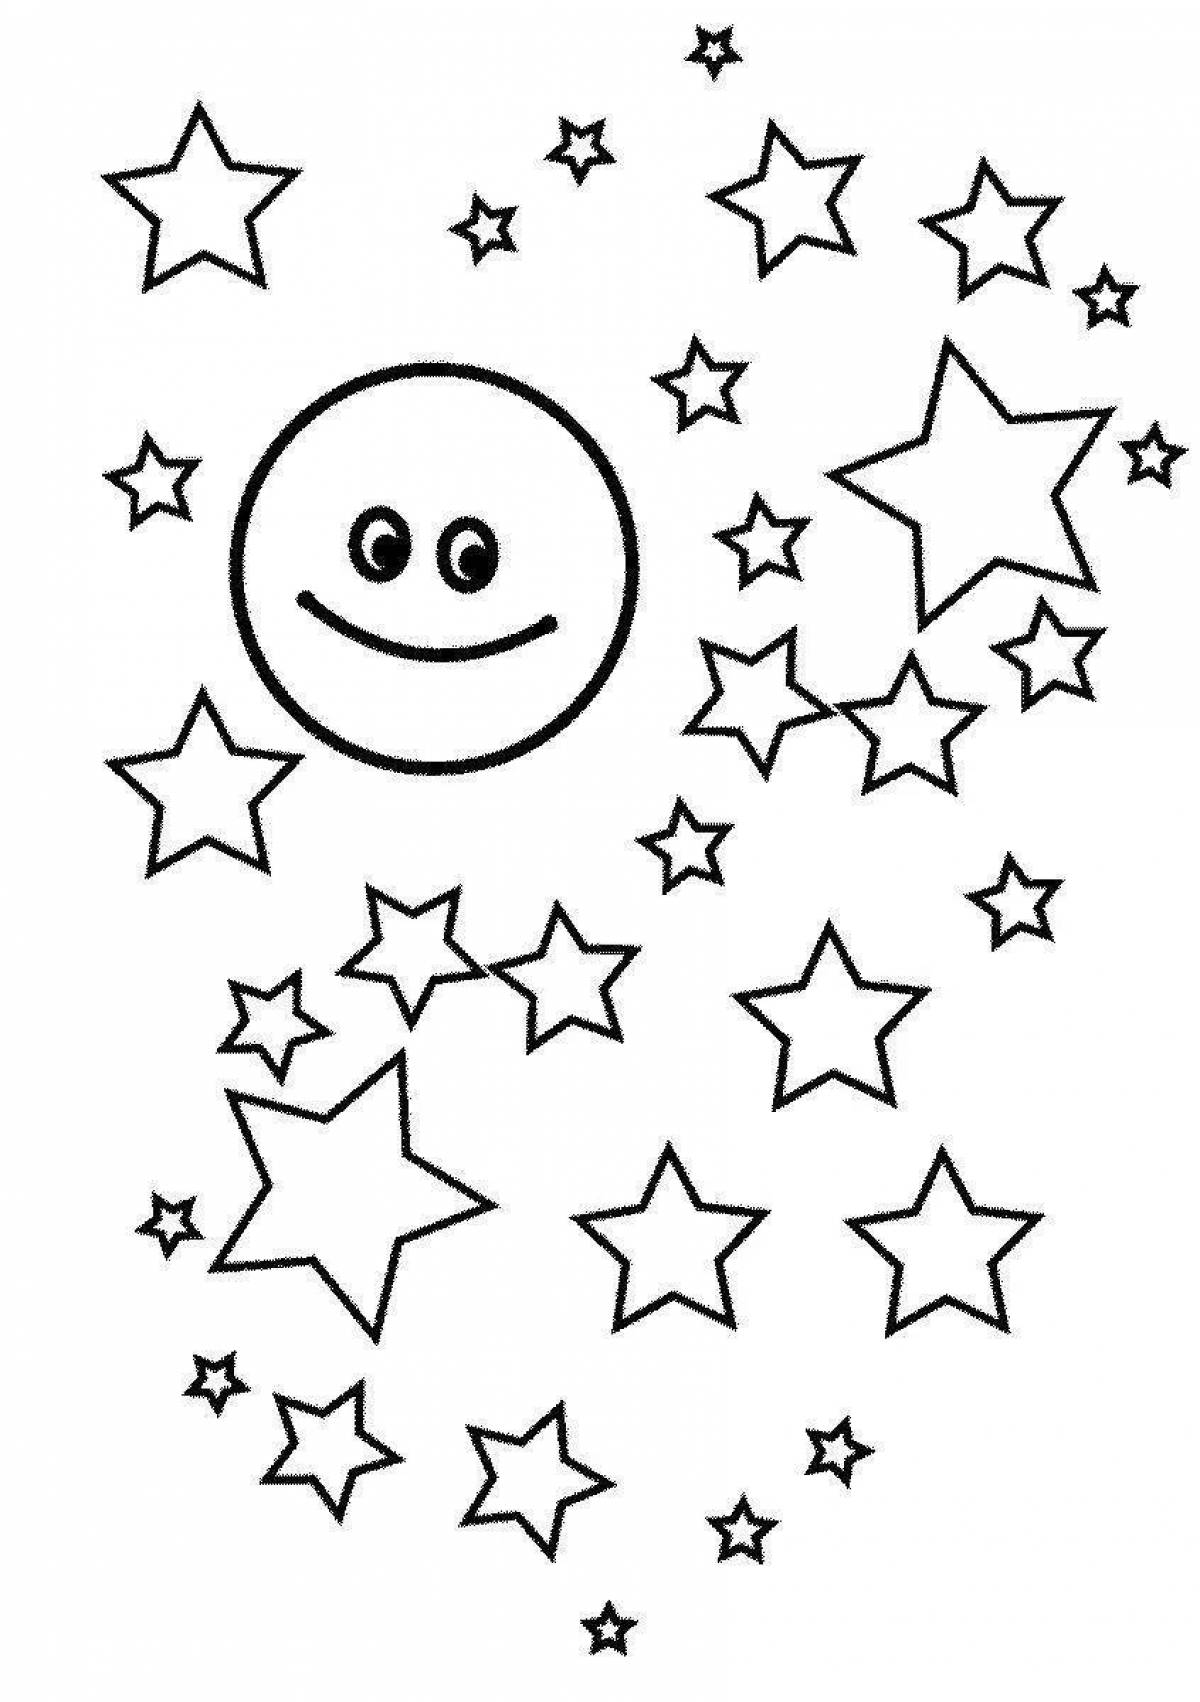 Exquisite night sky coloring page